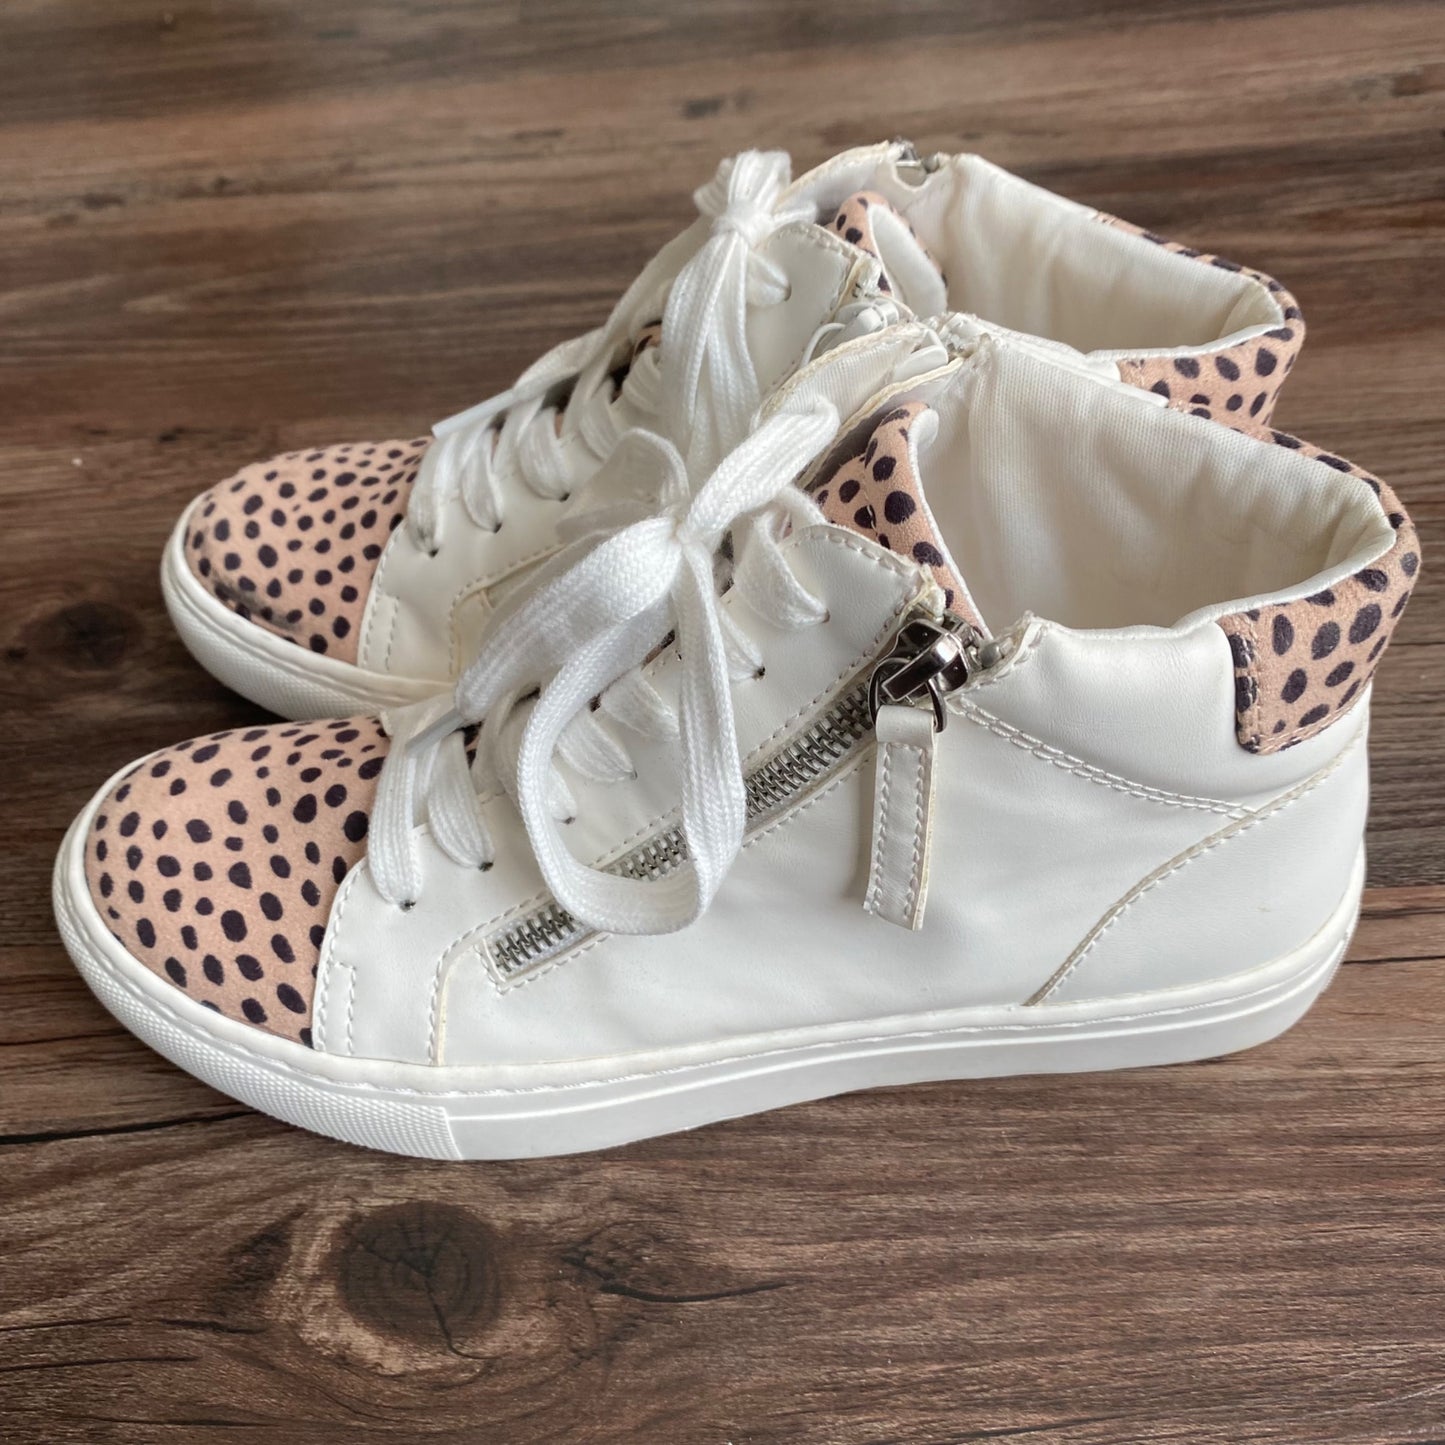 Dolce Vita Sz 6 Poo Bear lace up high top shoes NWT